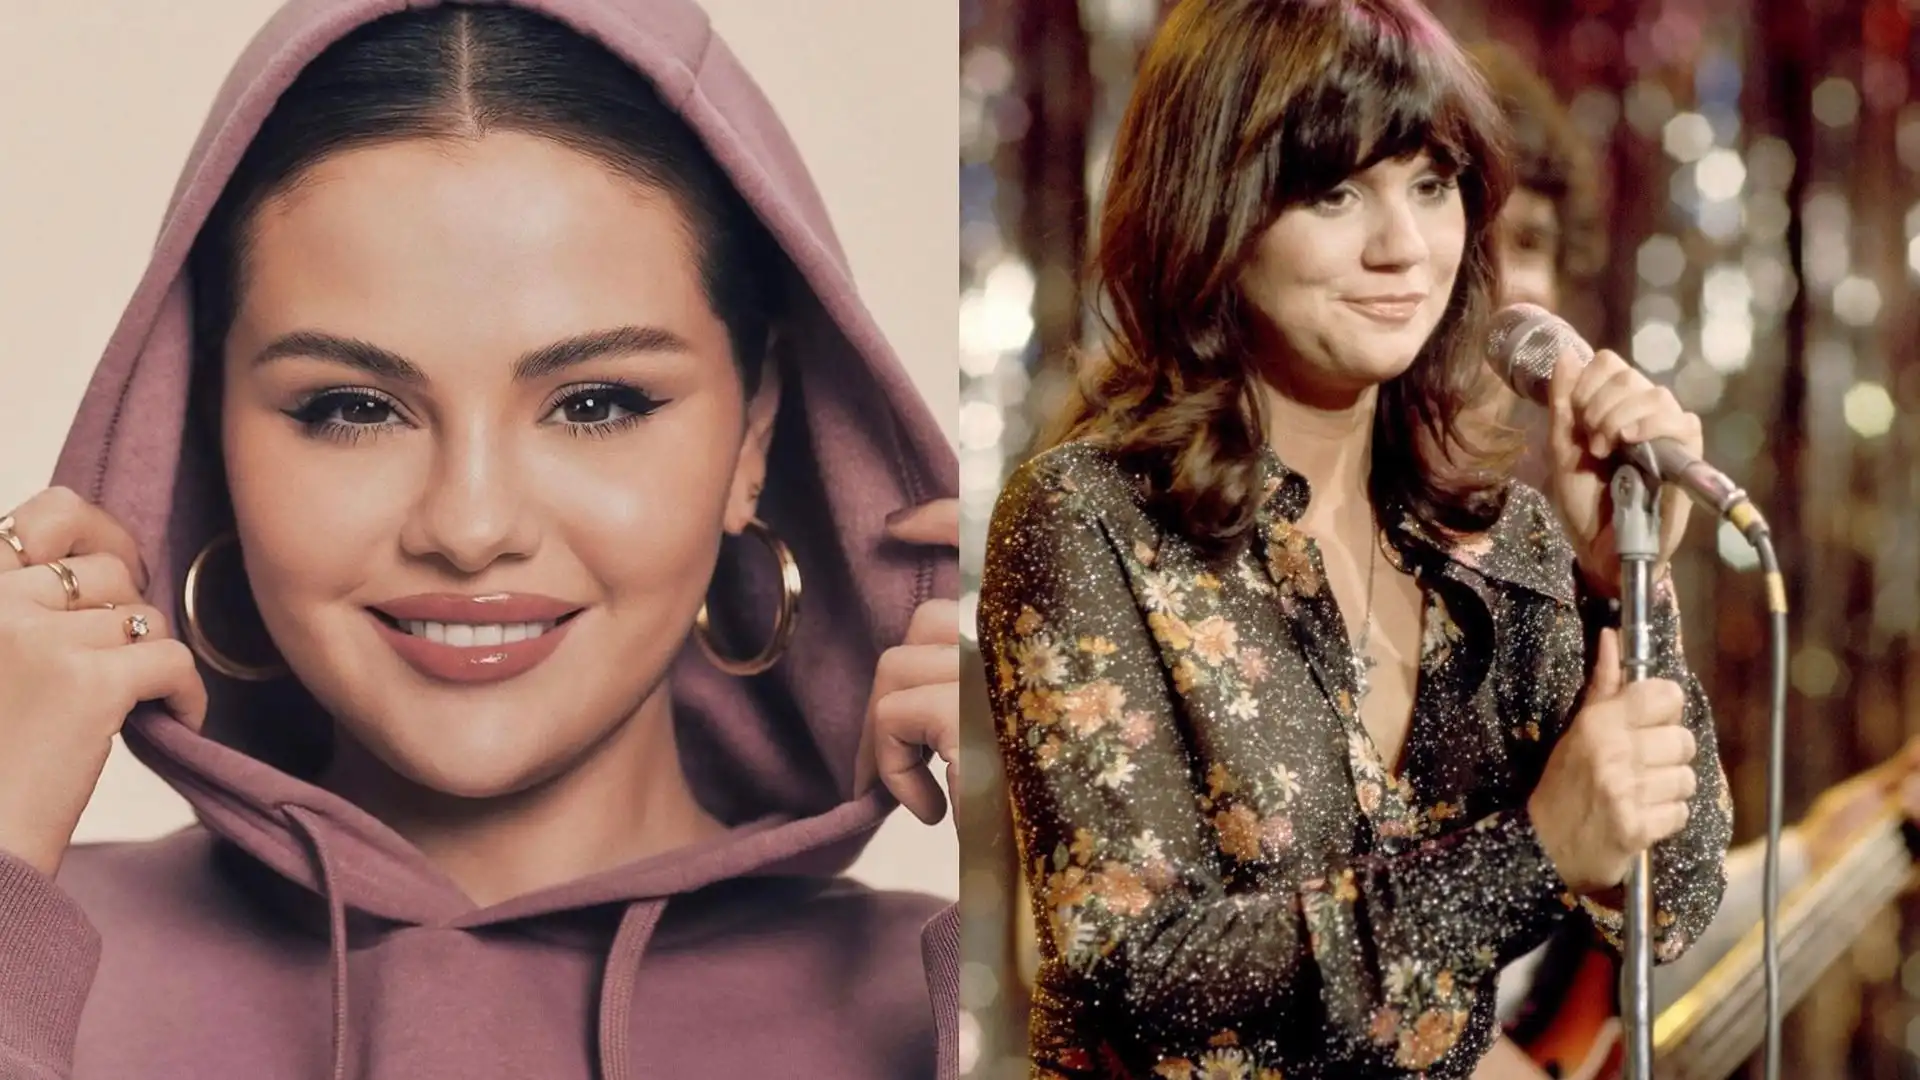 Fans React as Selena Gomez is Cast as Linda Ronstadt for Singer's Biopic: 